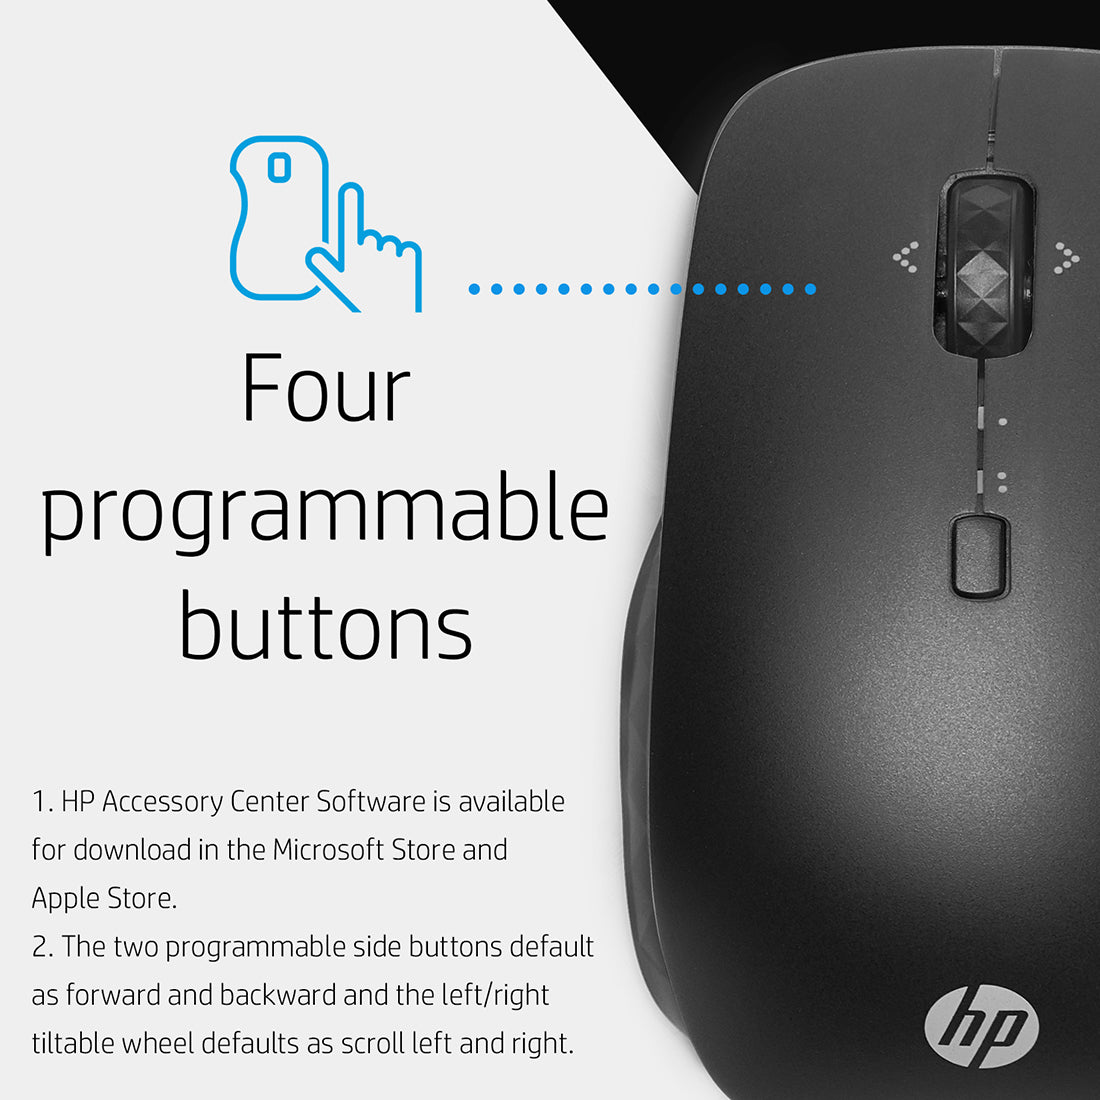 HP Bluetooth Travel Mouse with 5-buttons and Trackon-glass Sensor